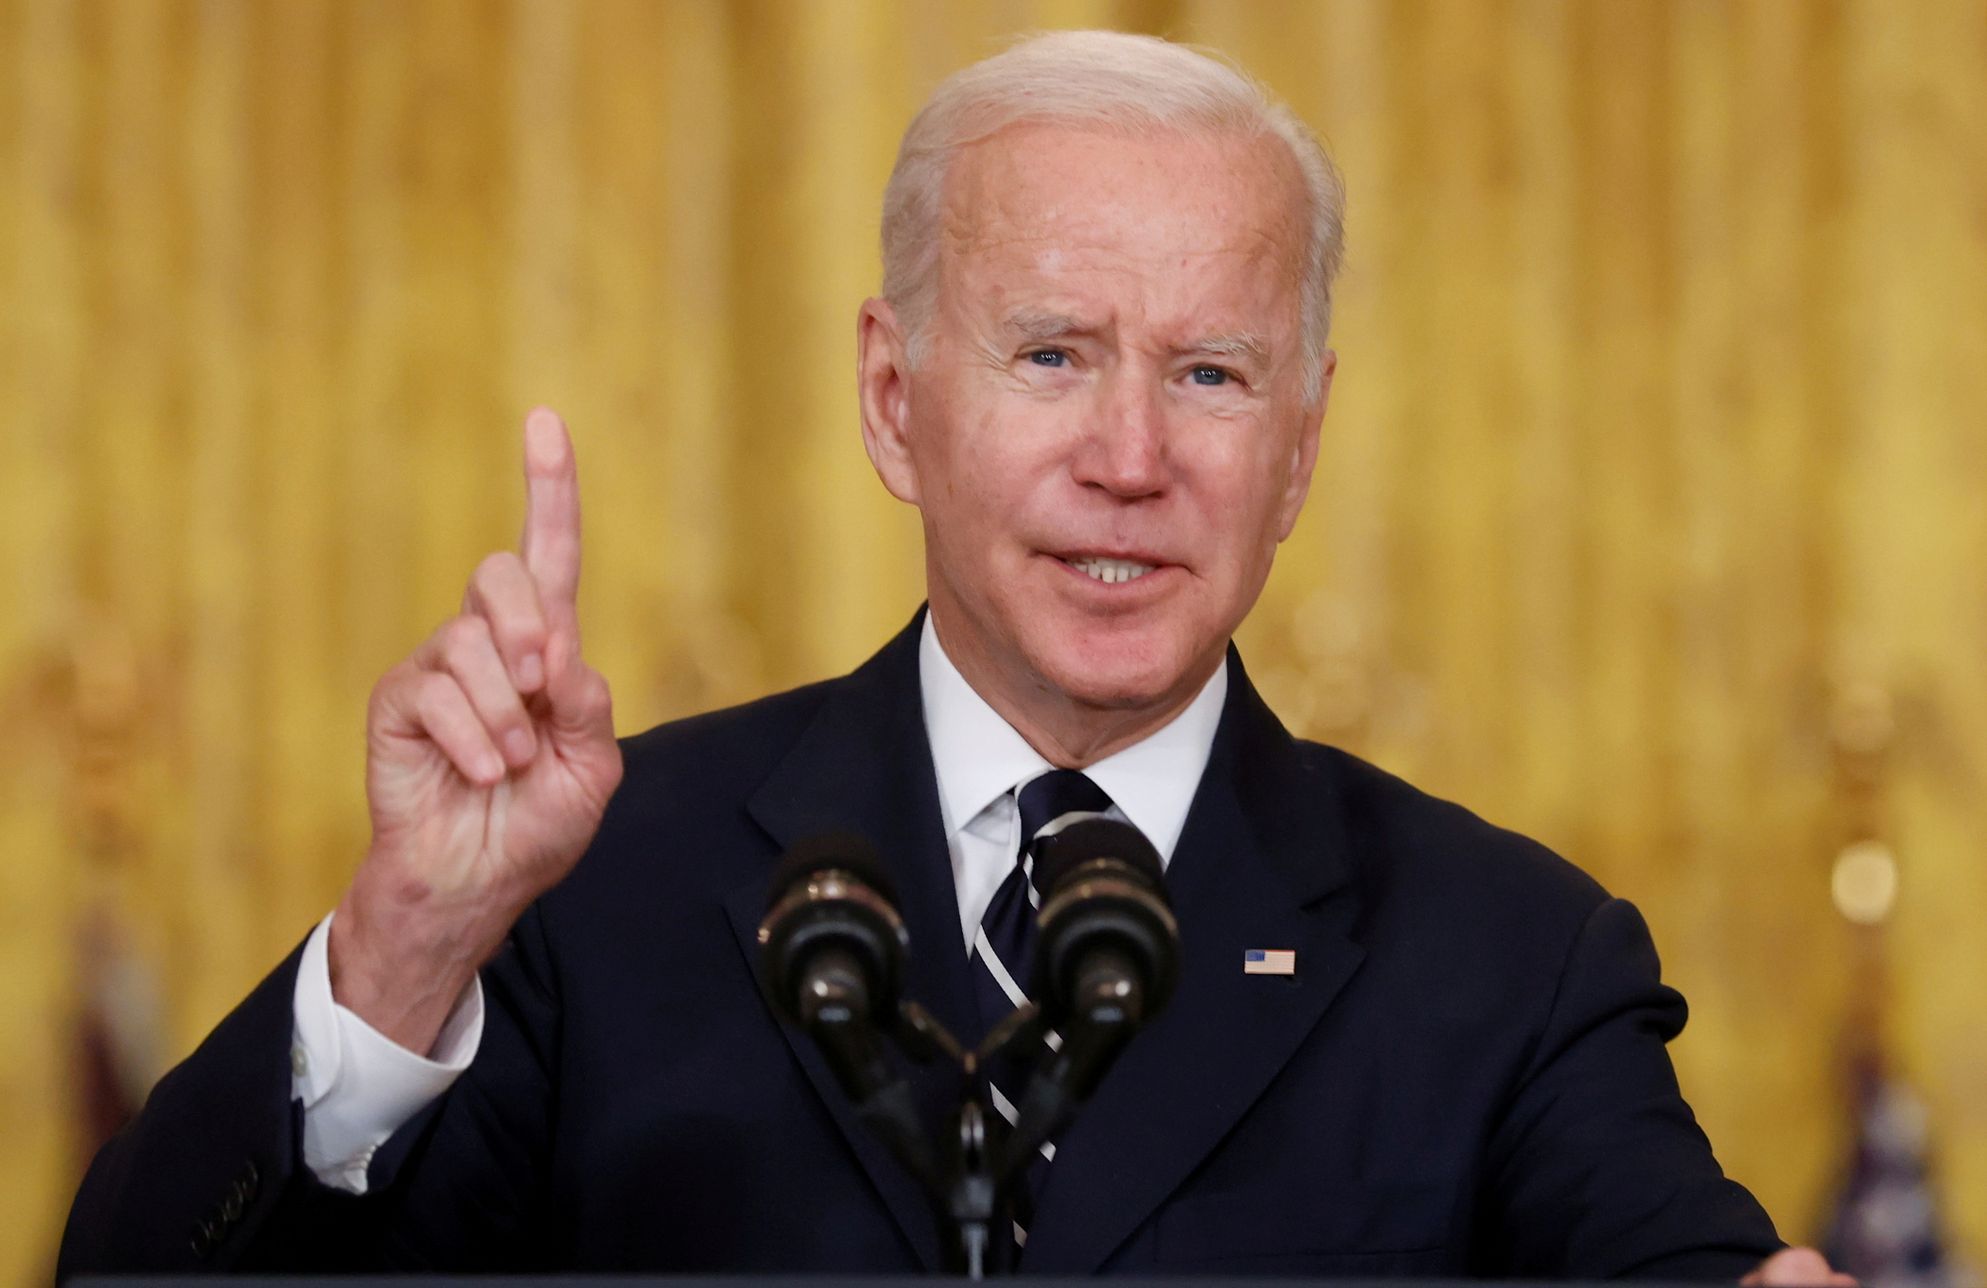 Biden conceded to run for president in 2024. Health clearance